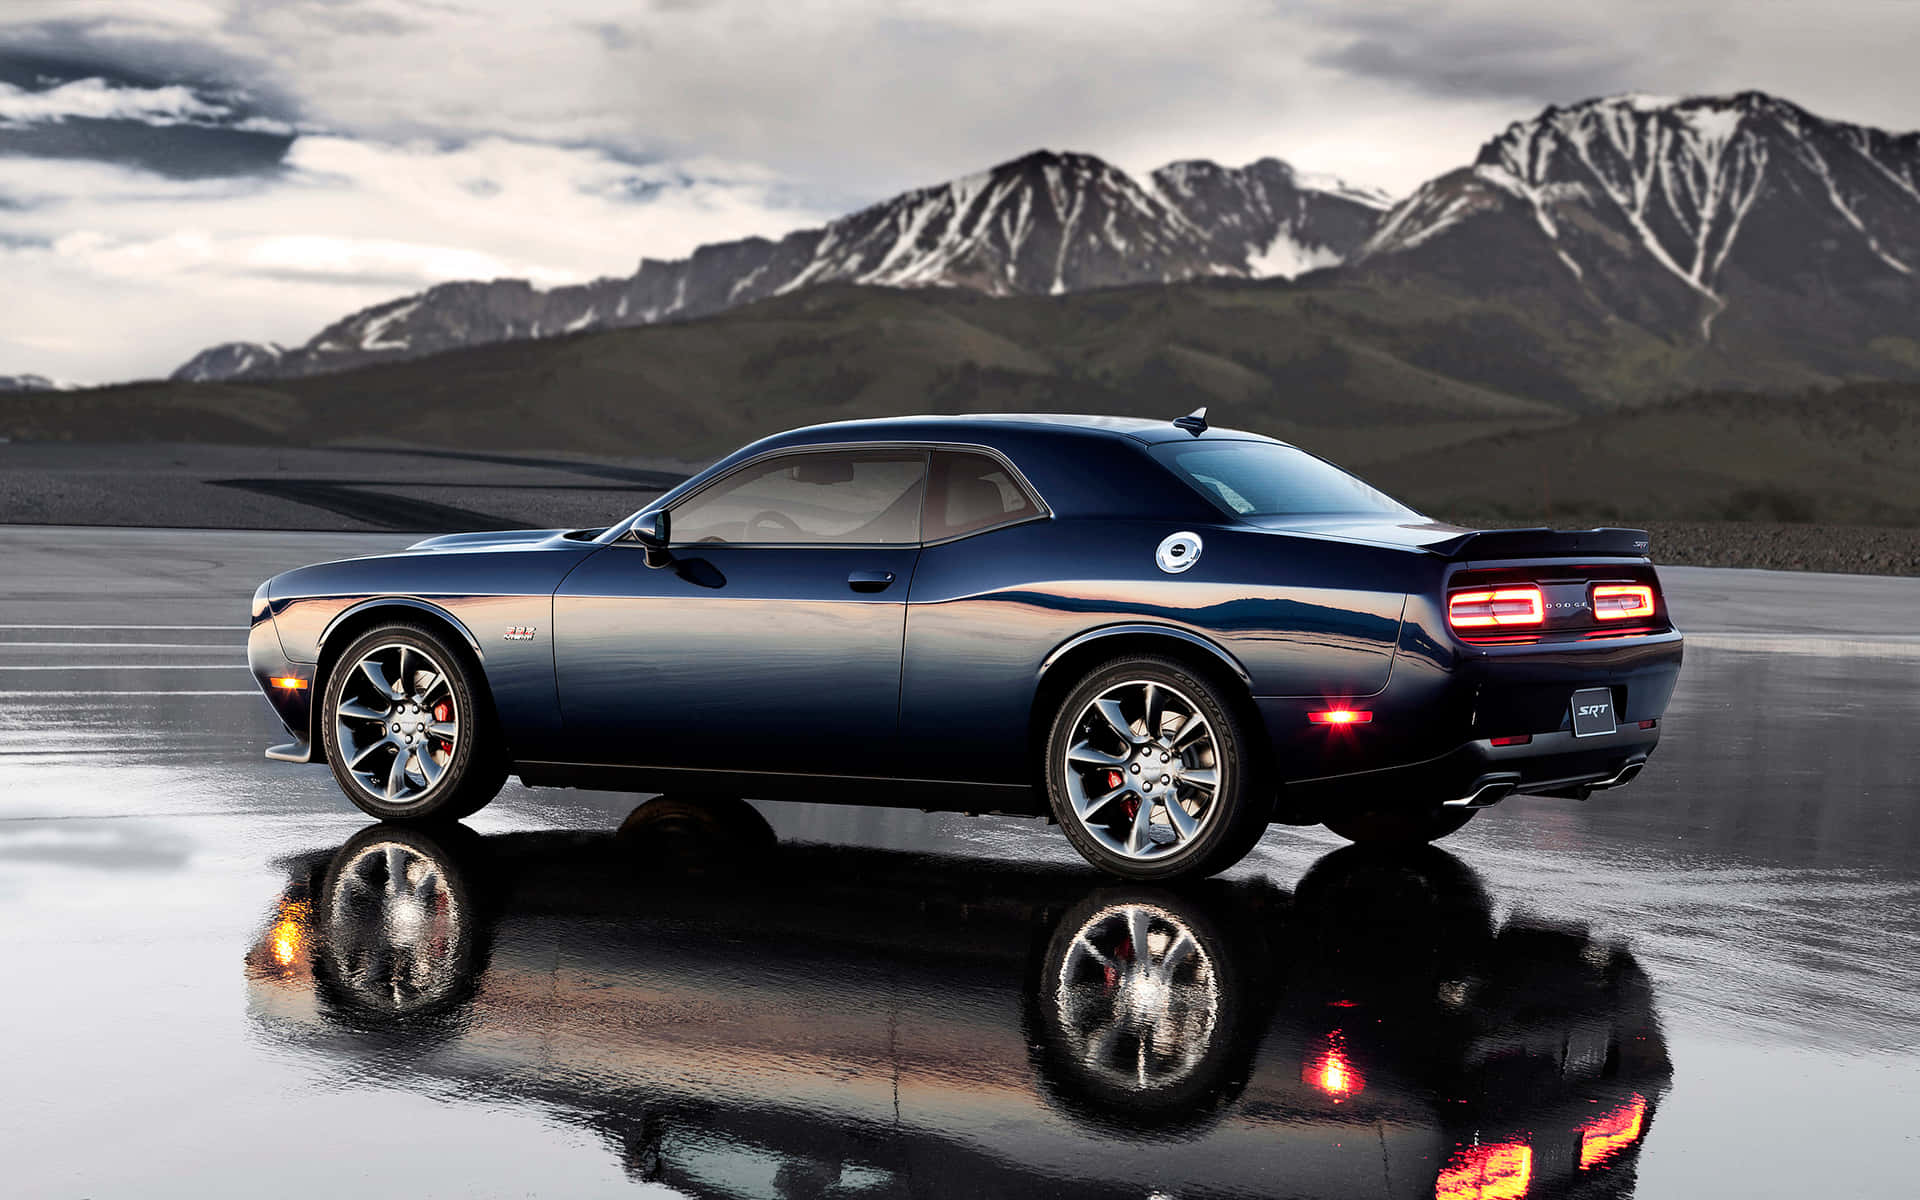 Dodgechallenger Srt Srt Srt Srt Srt Srt Srt Would Be 